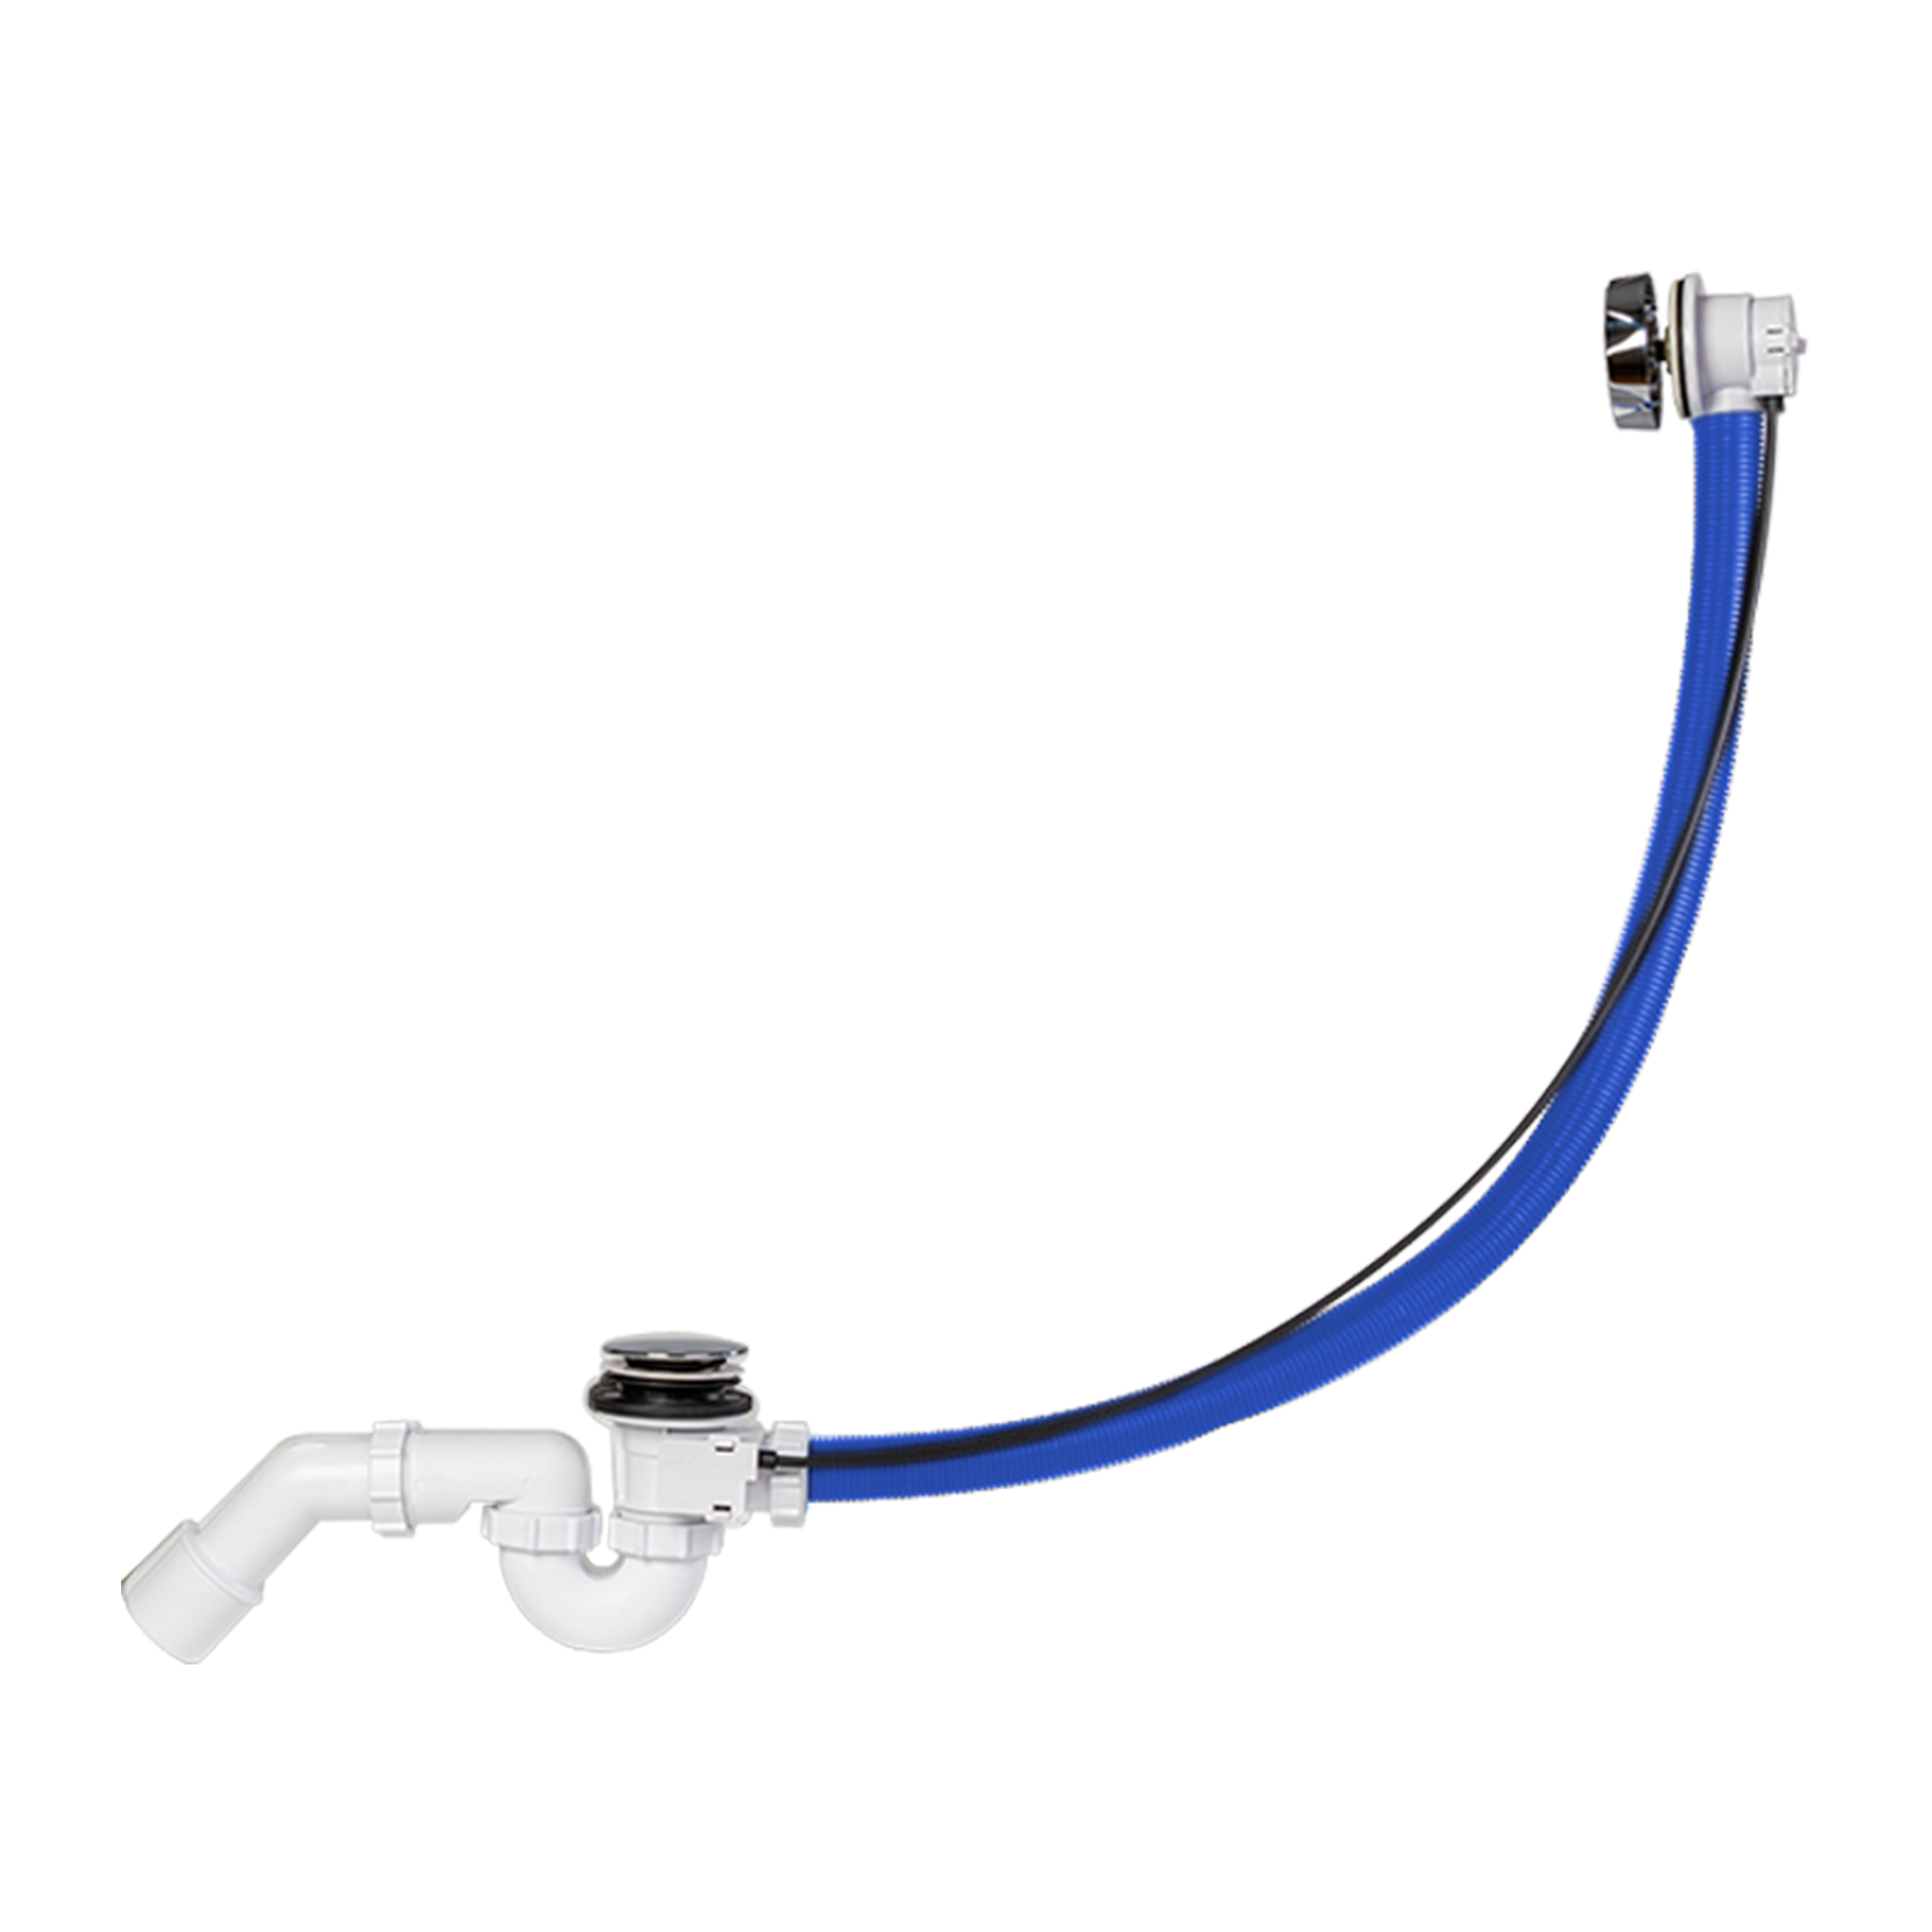 Automated bath trap chrome plated, with 1800 mm long cable with bowden